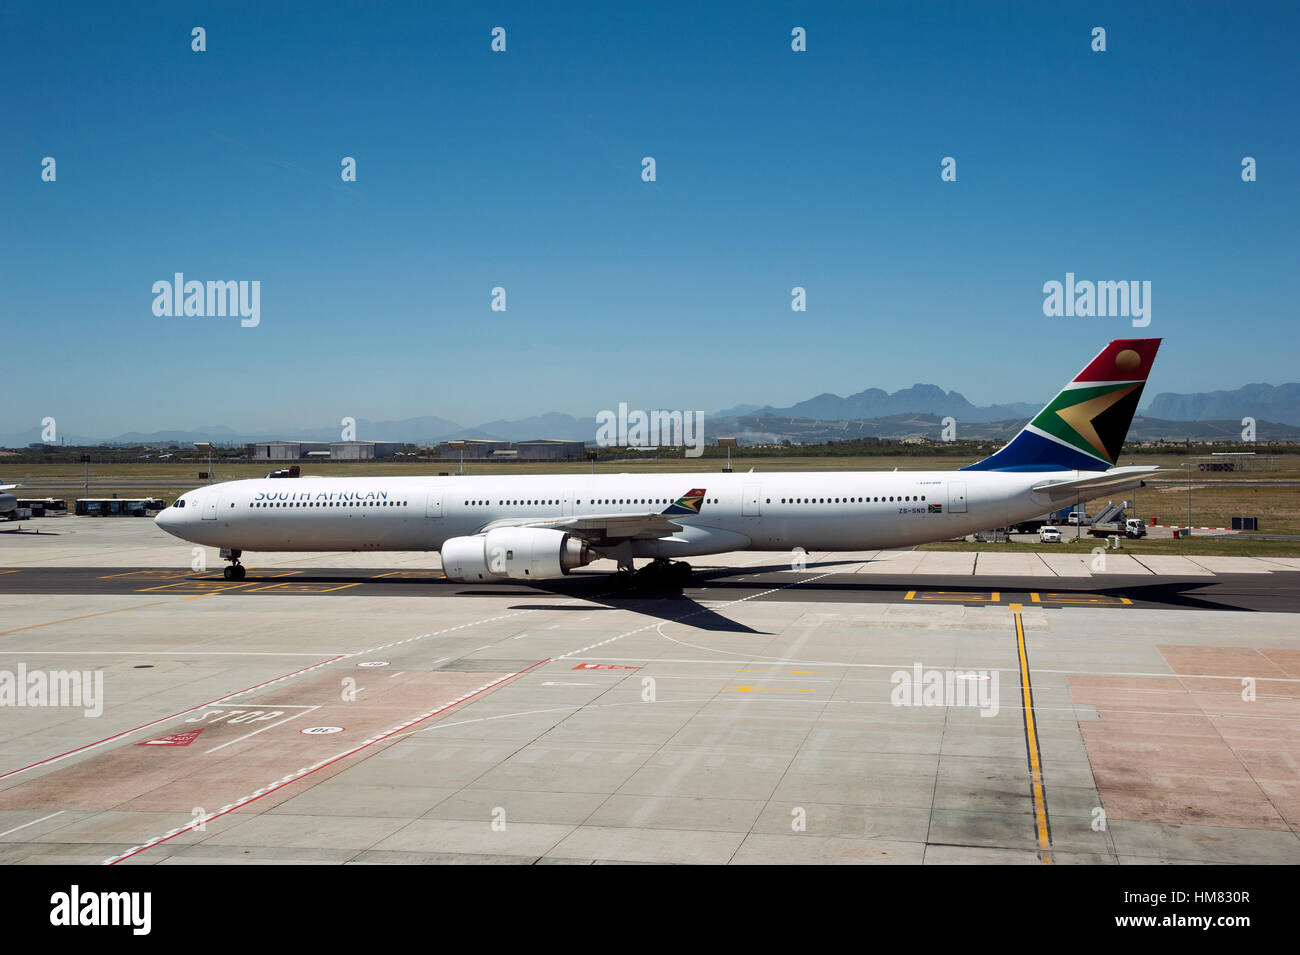 Cape Town International Airport South Africa,A South African Airways A340-600 passenger jet taxi-ing Stock Photo